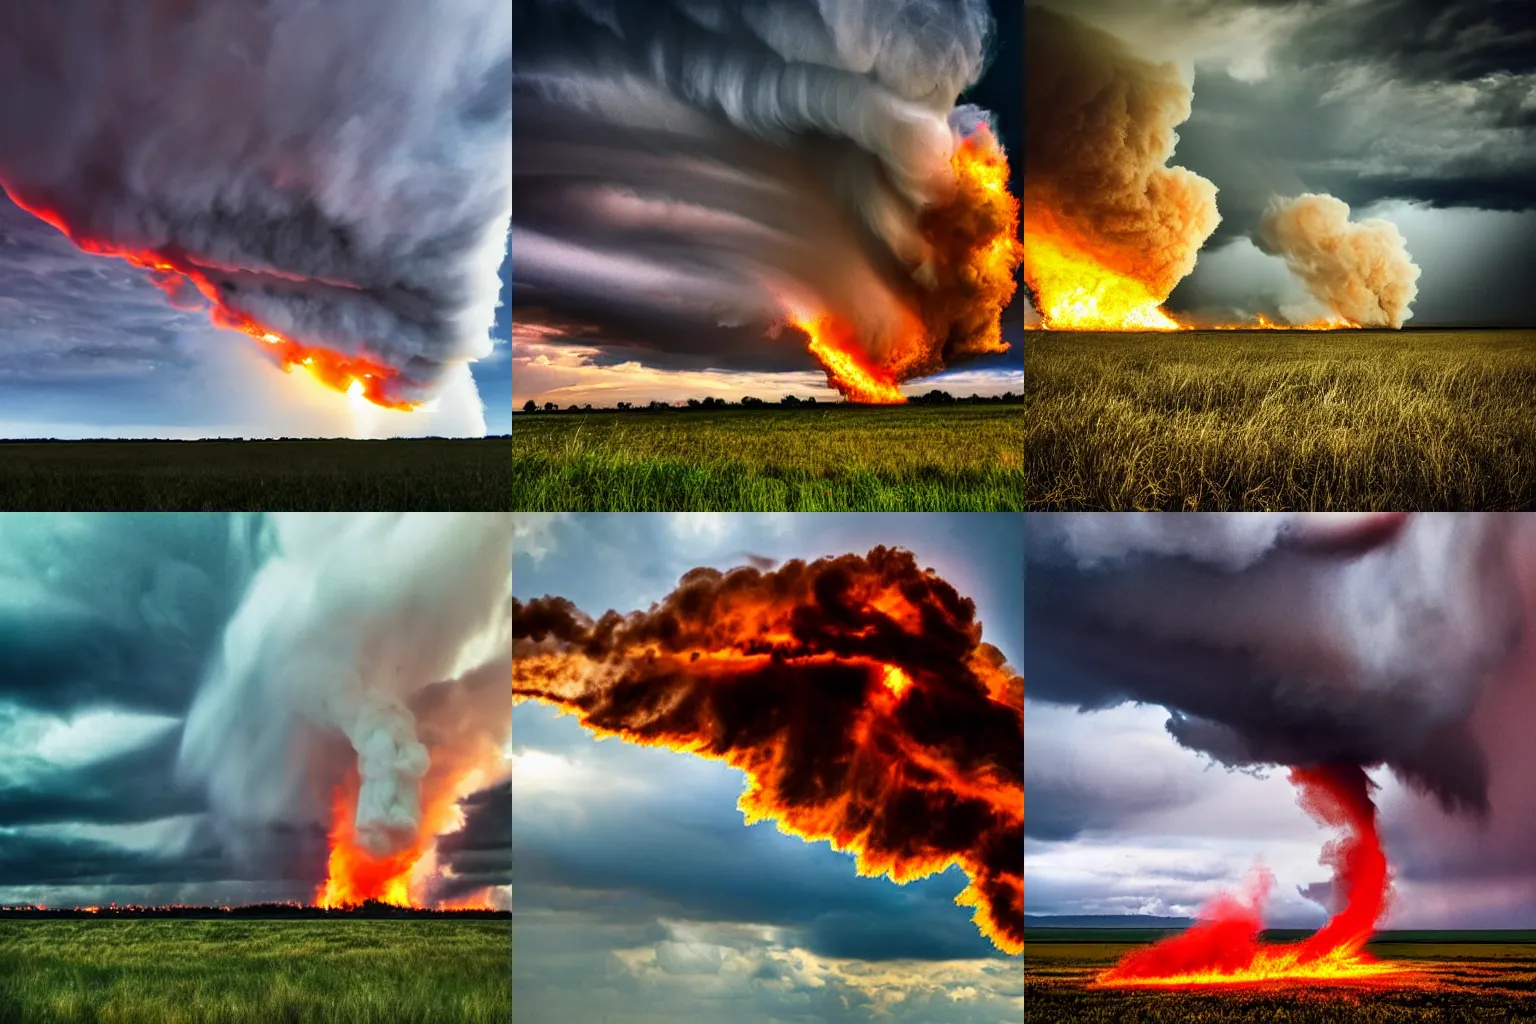 Prompt: A tornado made of fire in a field under a cloudy sky, realistic, dramatic lighting